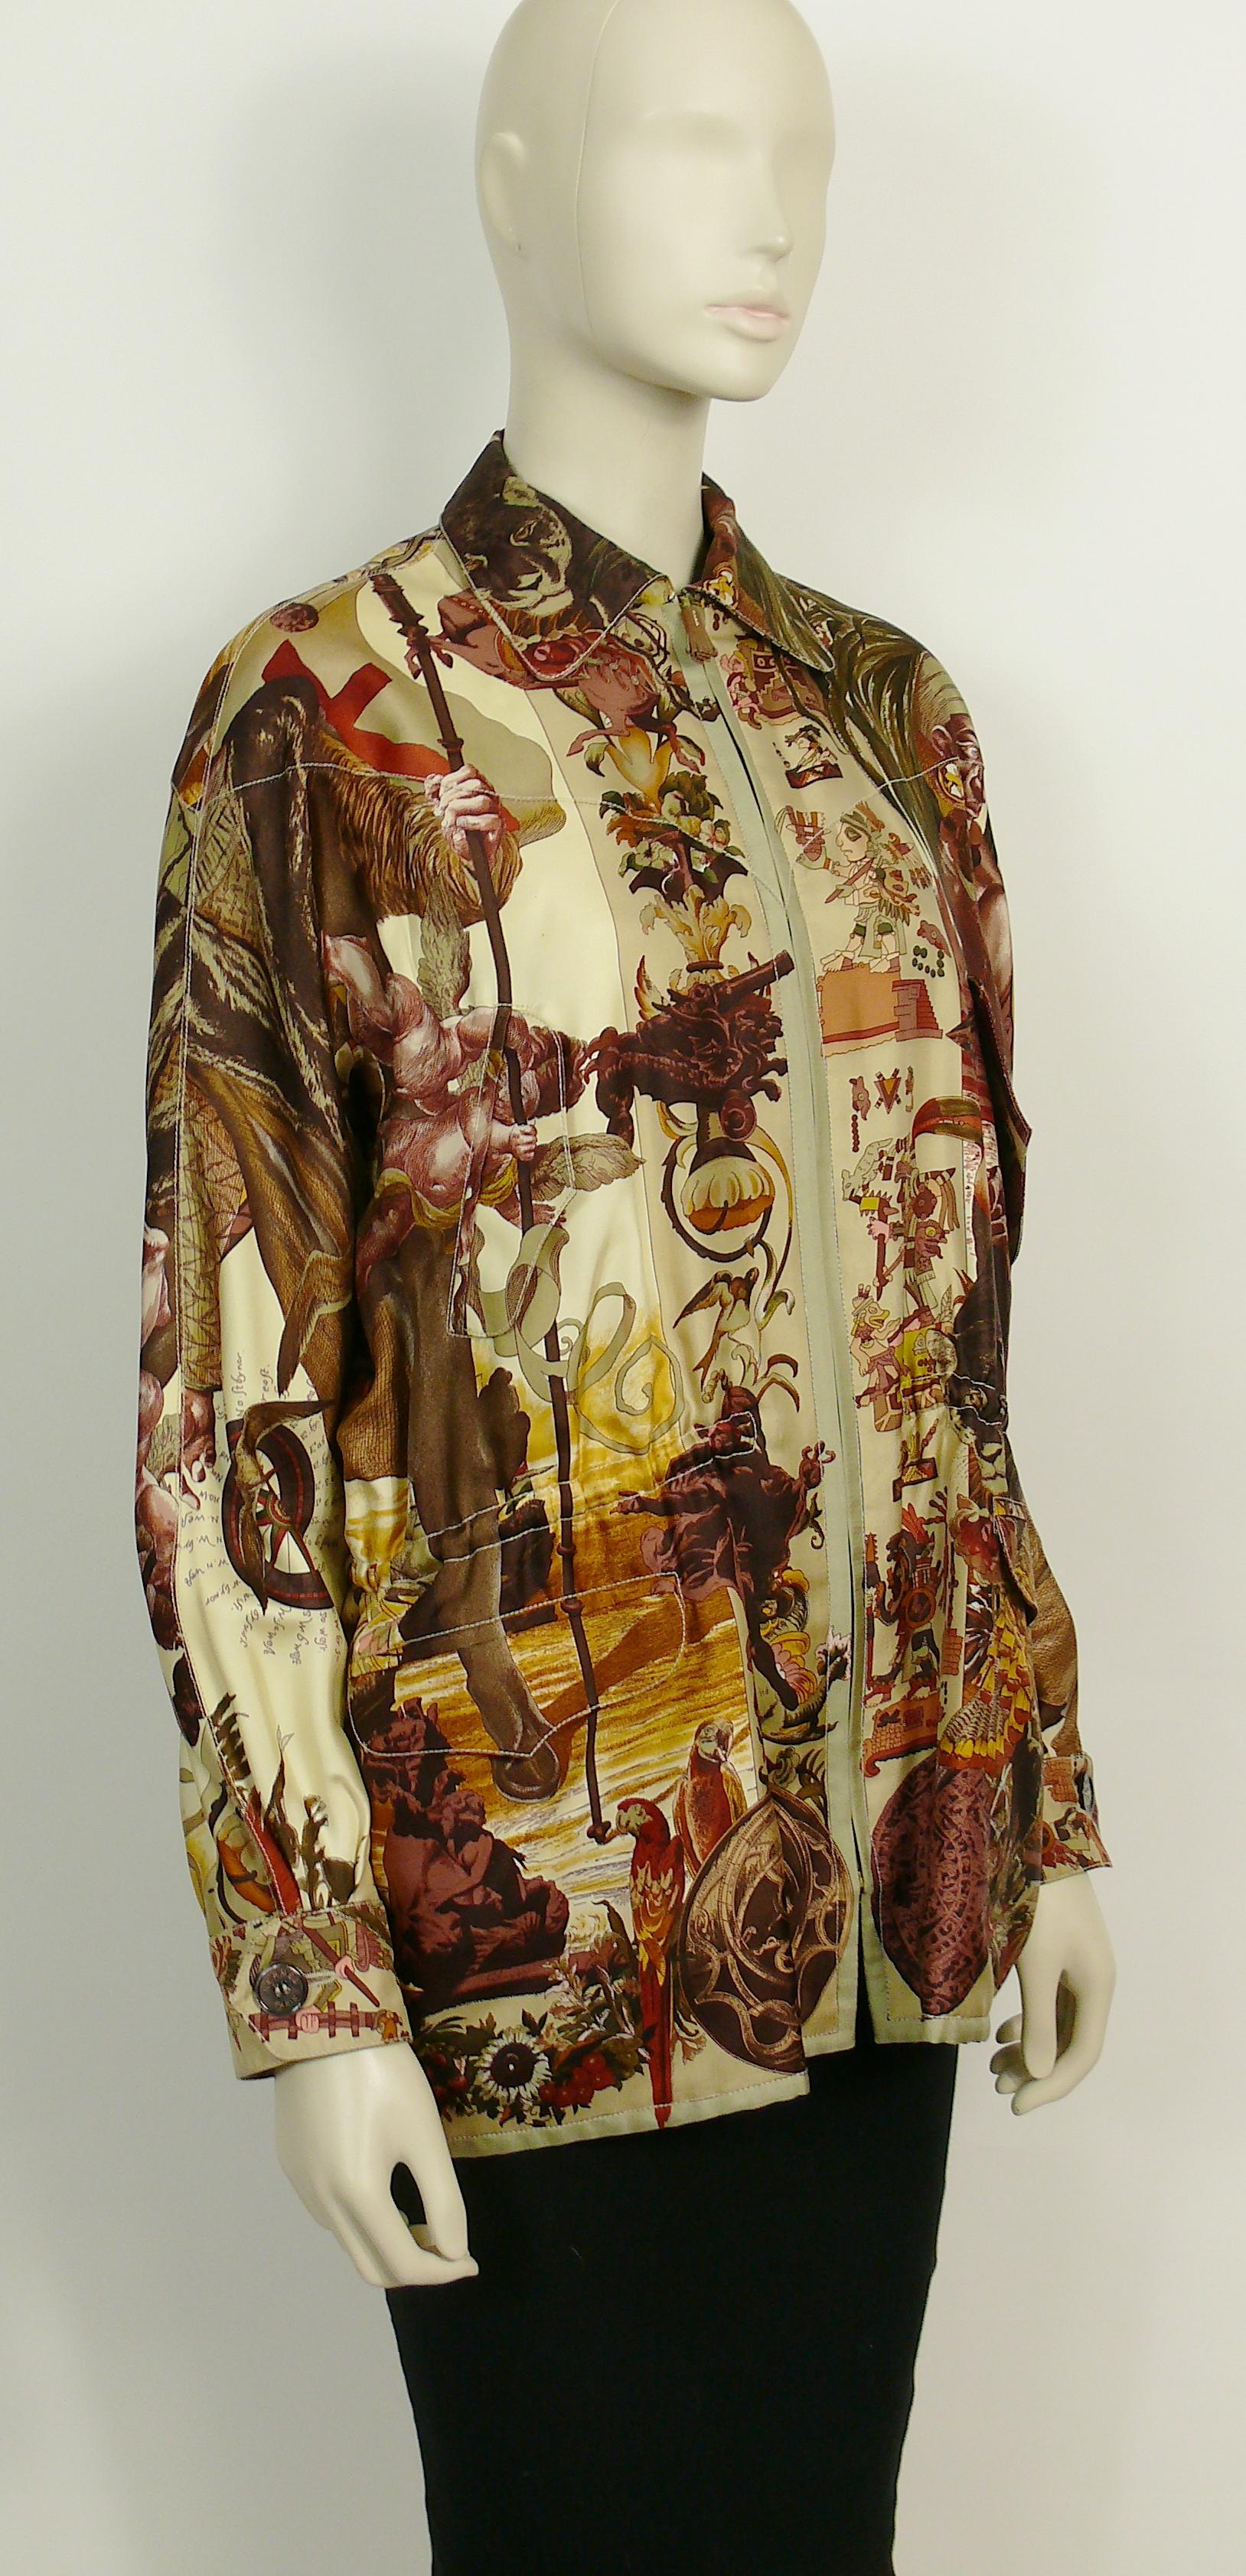 HERMES vintage rare reversible jacket designed by Texan artist KERMIT OLIVER, featuring American theme prints : LES AMERIQUES on one side and FAUNE ET FLORE DU TEXAS on the other.

LES AMERIQUES was designed to commemorate the 500th anniversary of